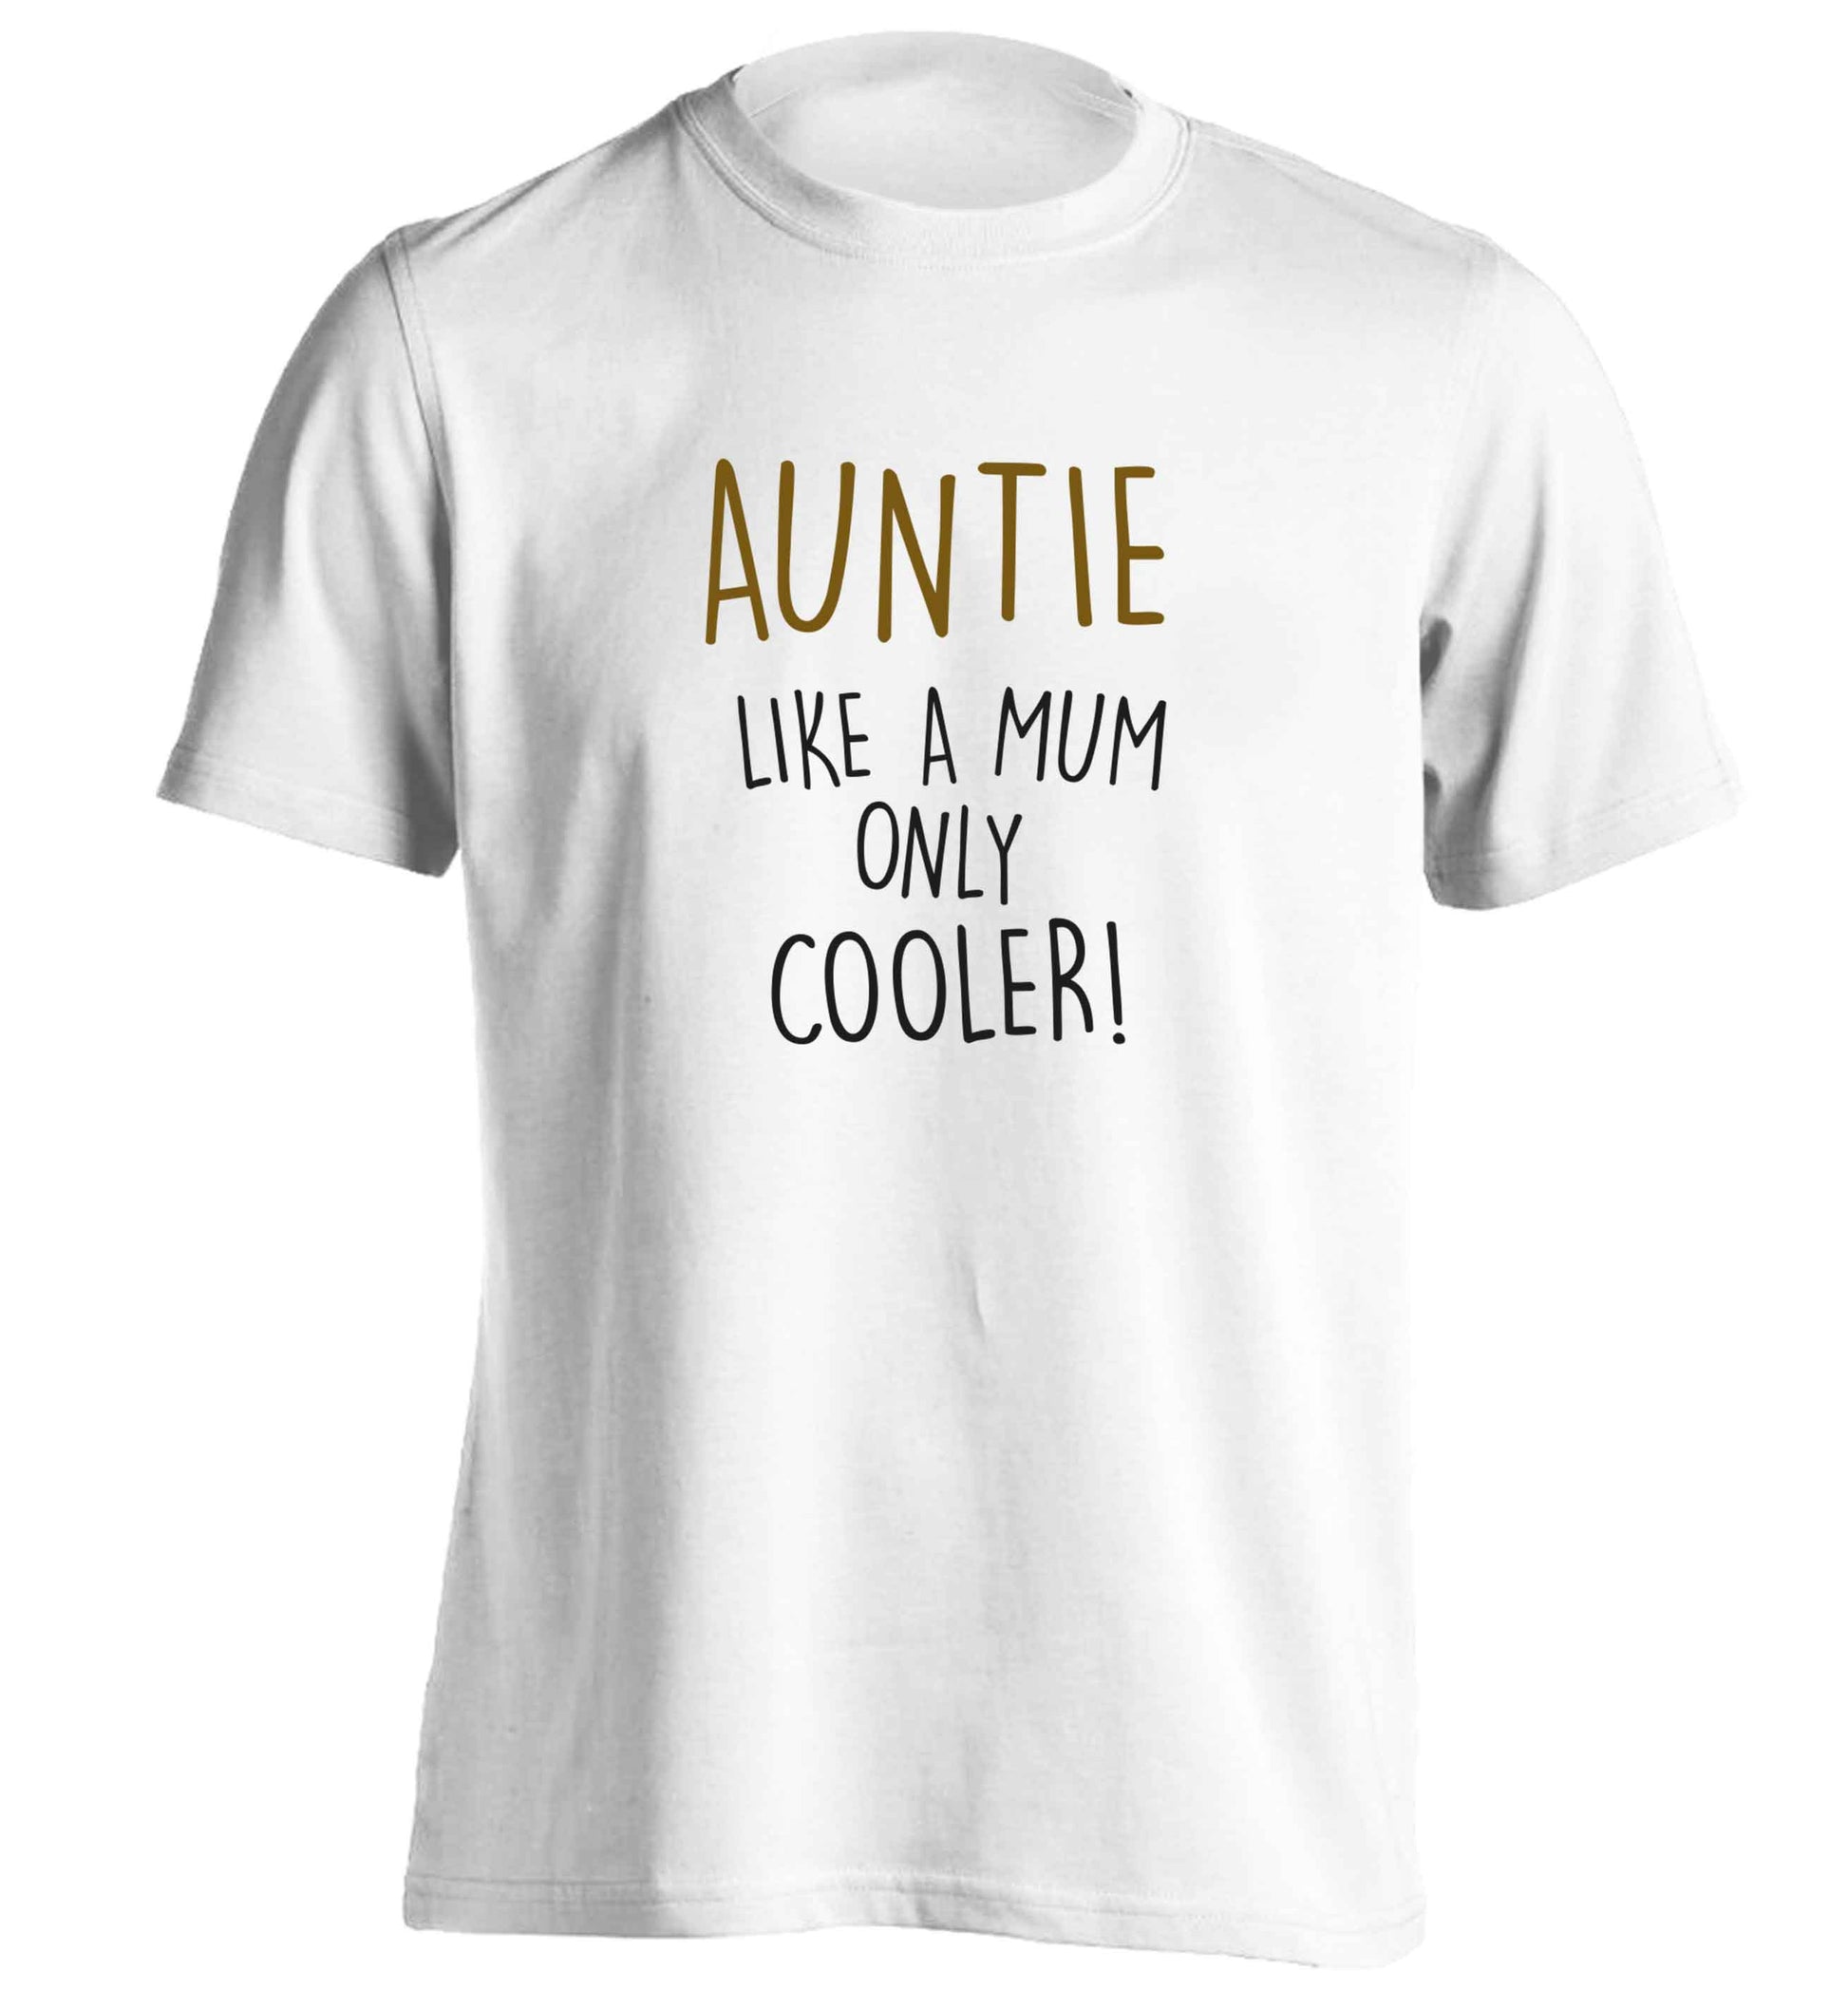 Auntie like a mum only cooler adults unisex white Tshirt 2XL